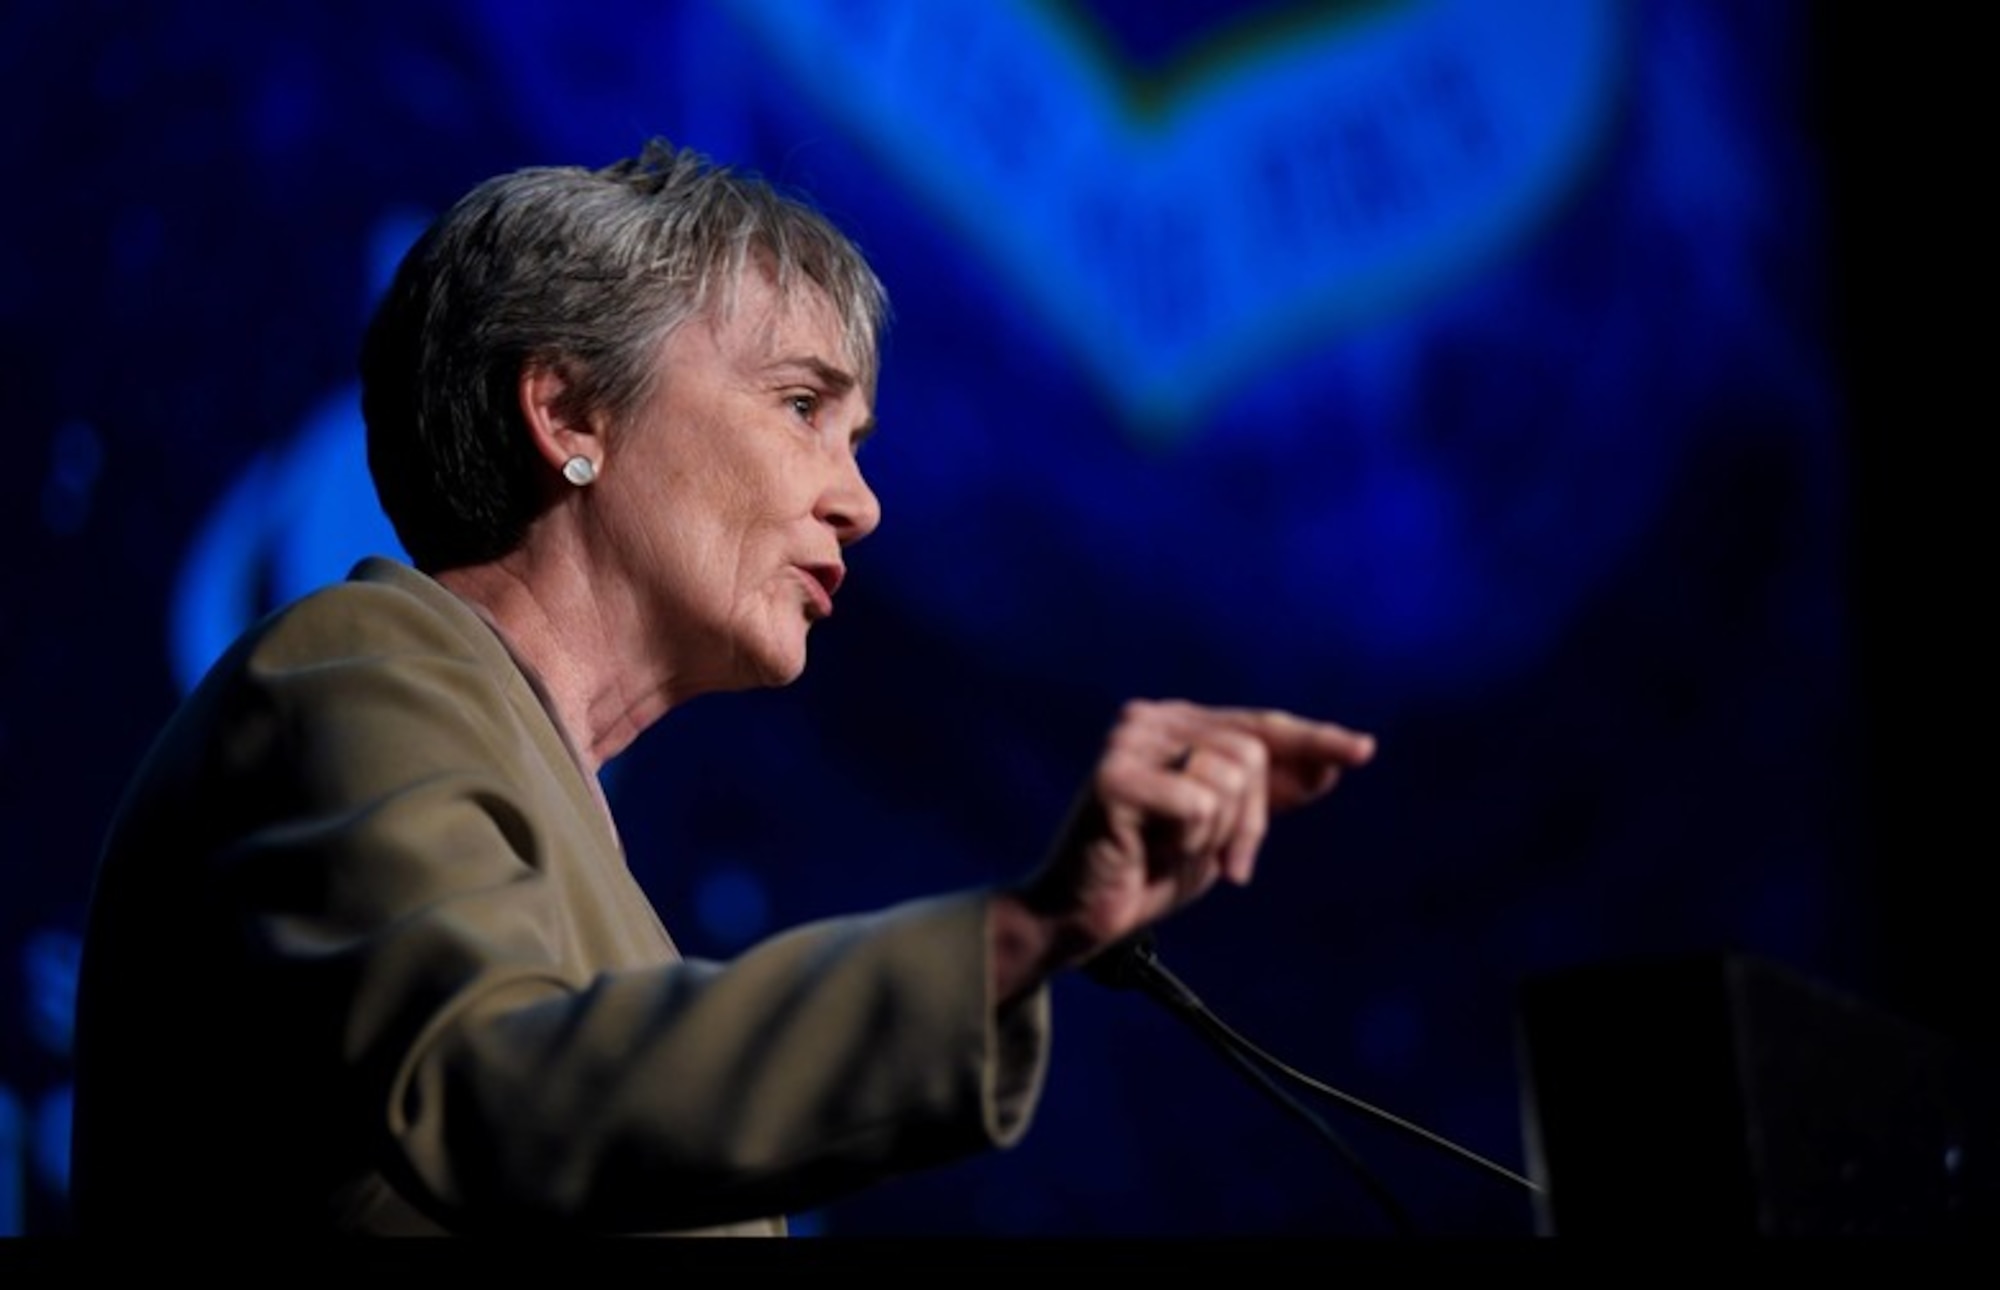 Secretary of the Air Force Heather Wilson emphasized the importance of the U.S. maintaining its dominance in space during a speech at the 35th Space Symposium in Colorado Springs, Colorado, April 9, 2019. Wilson announced her resignation in March after she was selected to be president of the University of Texas, El Paso; her last day as Air Force secretary was May 31, 2019. (U.S. Air Force photo by Airman 1st Class Michael Mathews)